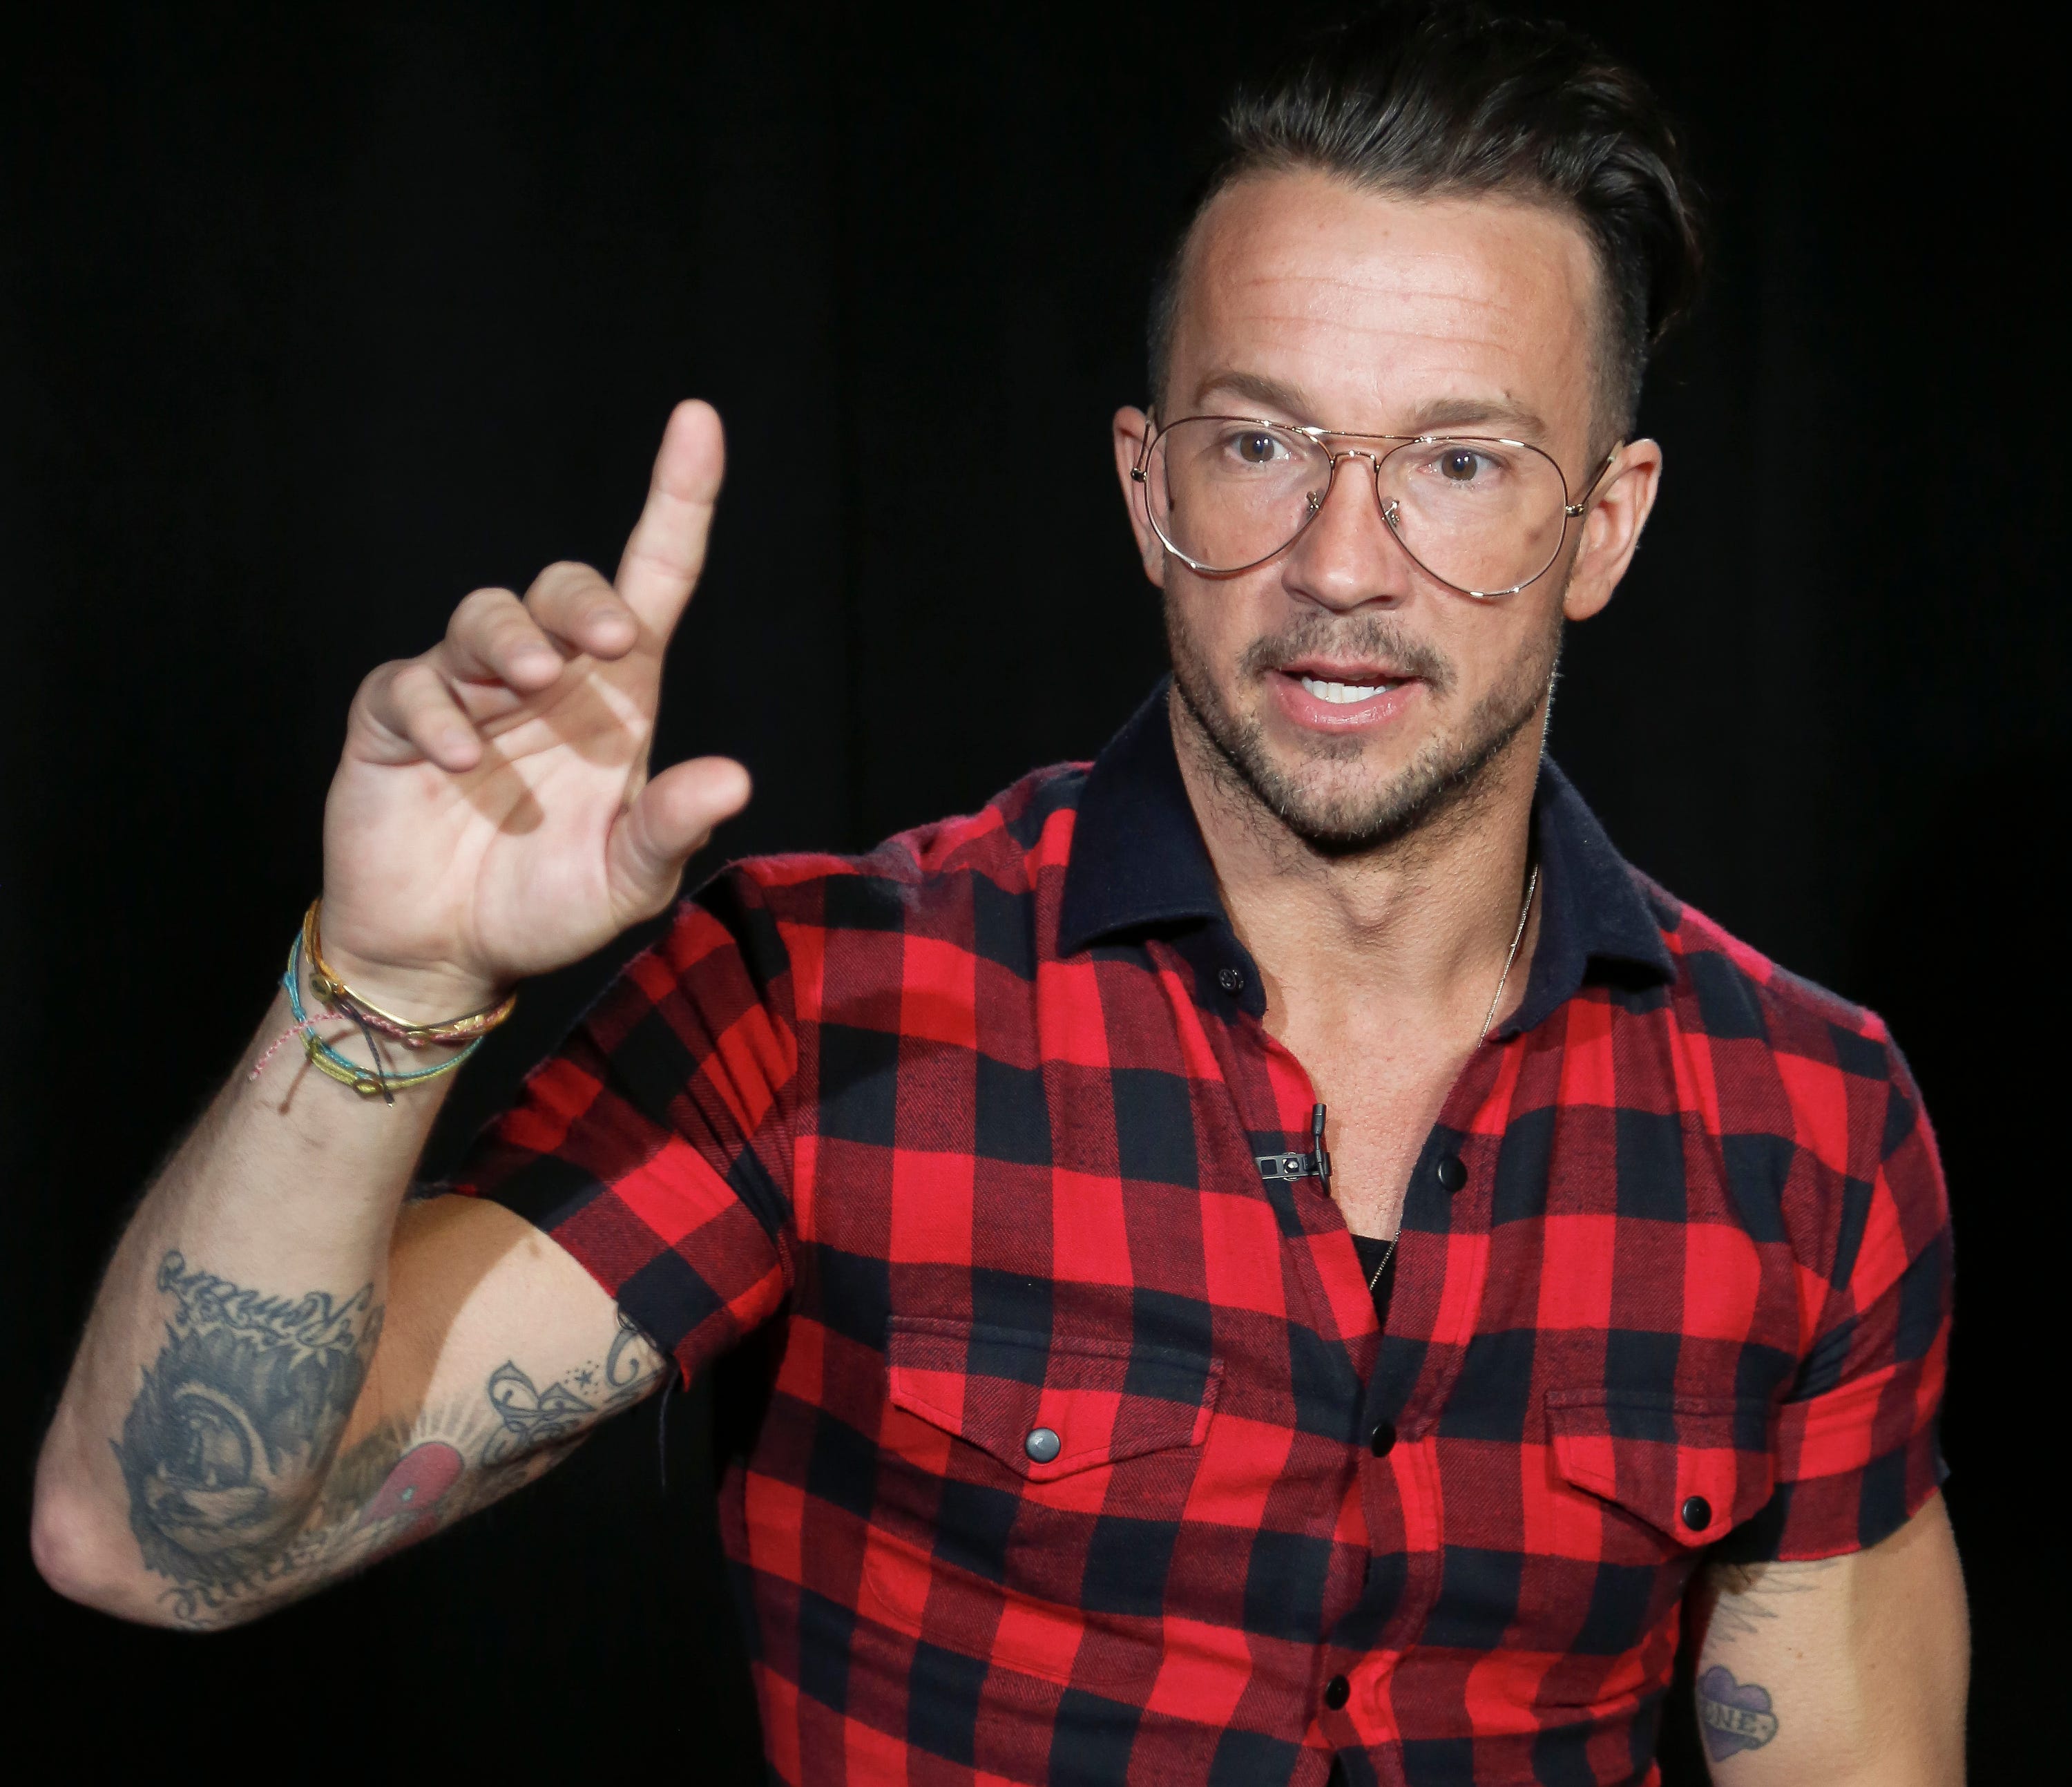 Embattled former minister to the stars Carl Lentz goes from Hillsong to Tulsa megachurch